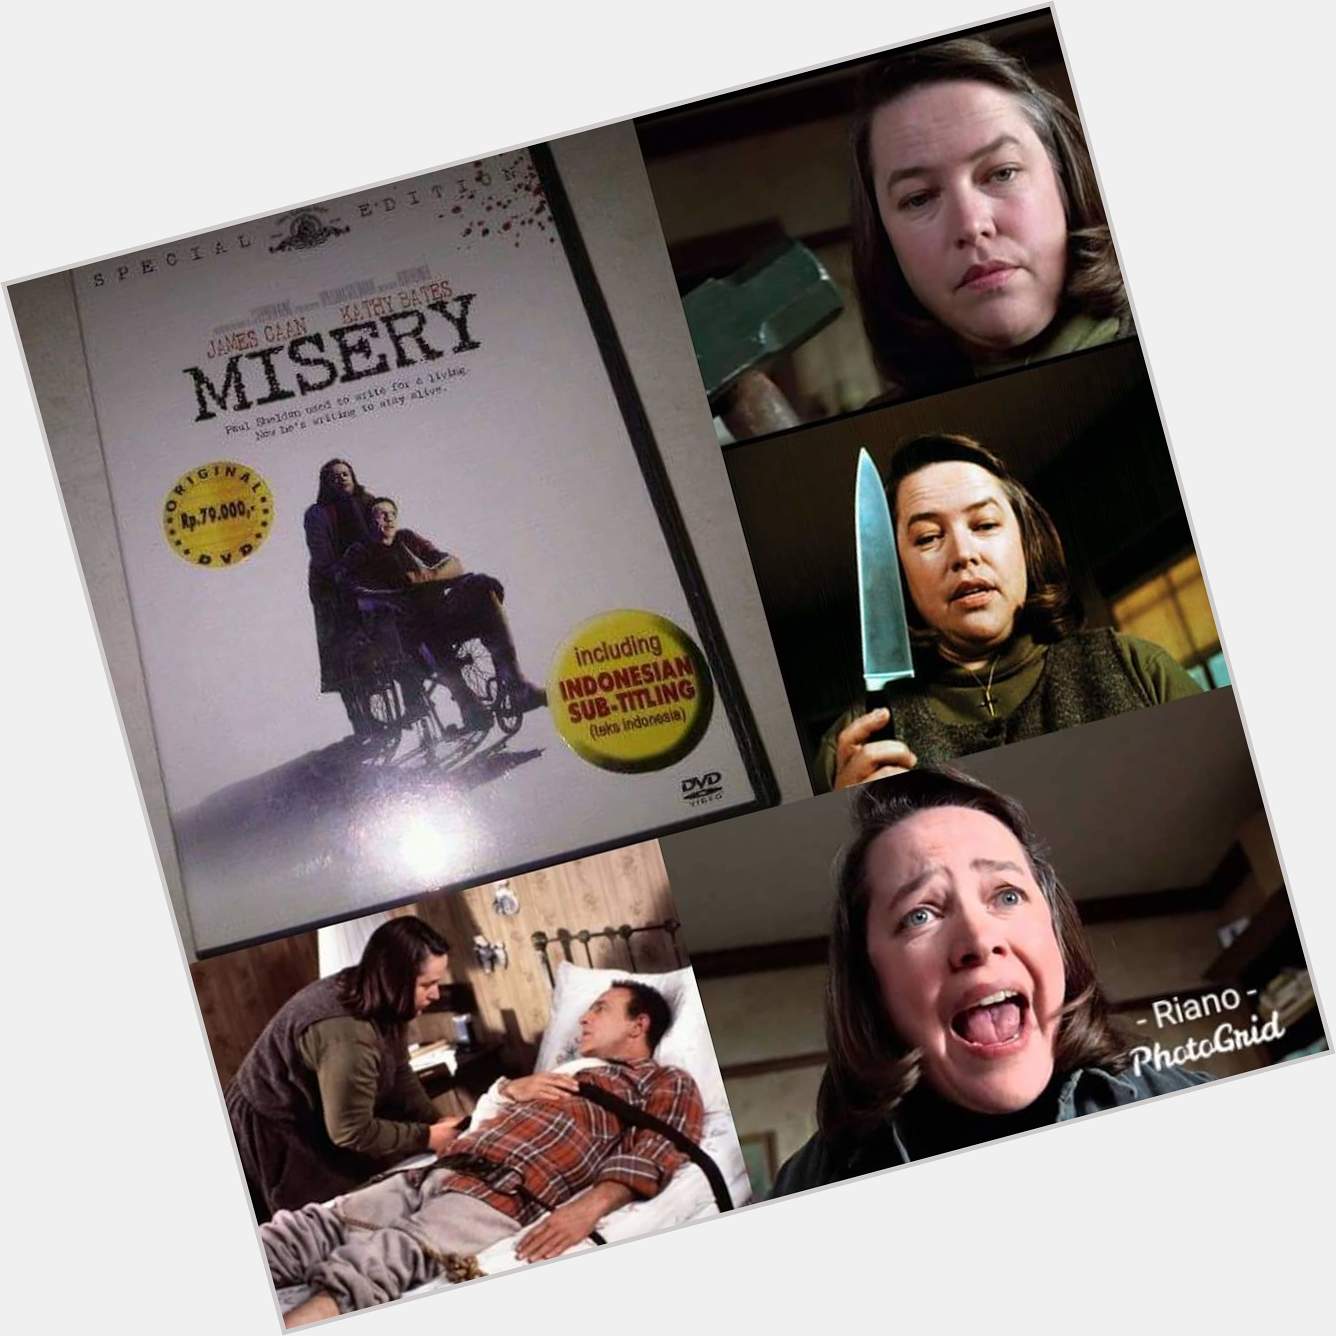 Happy birthday Kathy Bates! Misery is still one of my favourite movies. 